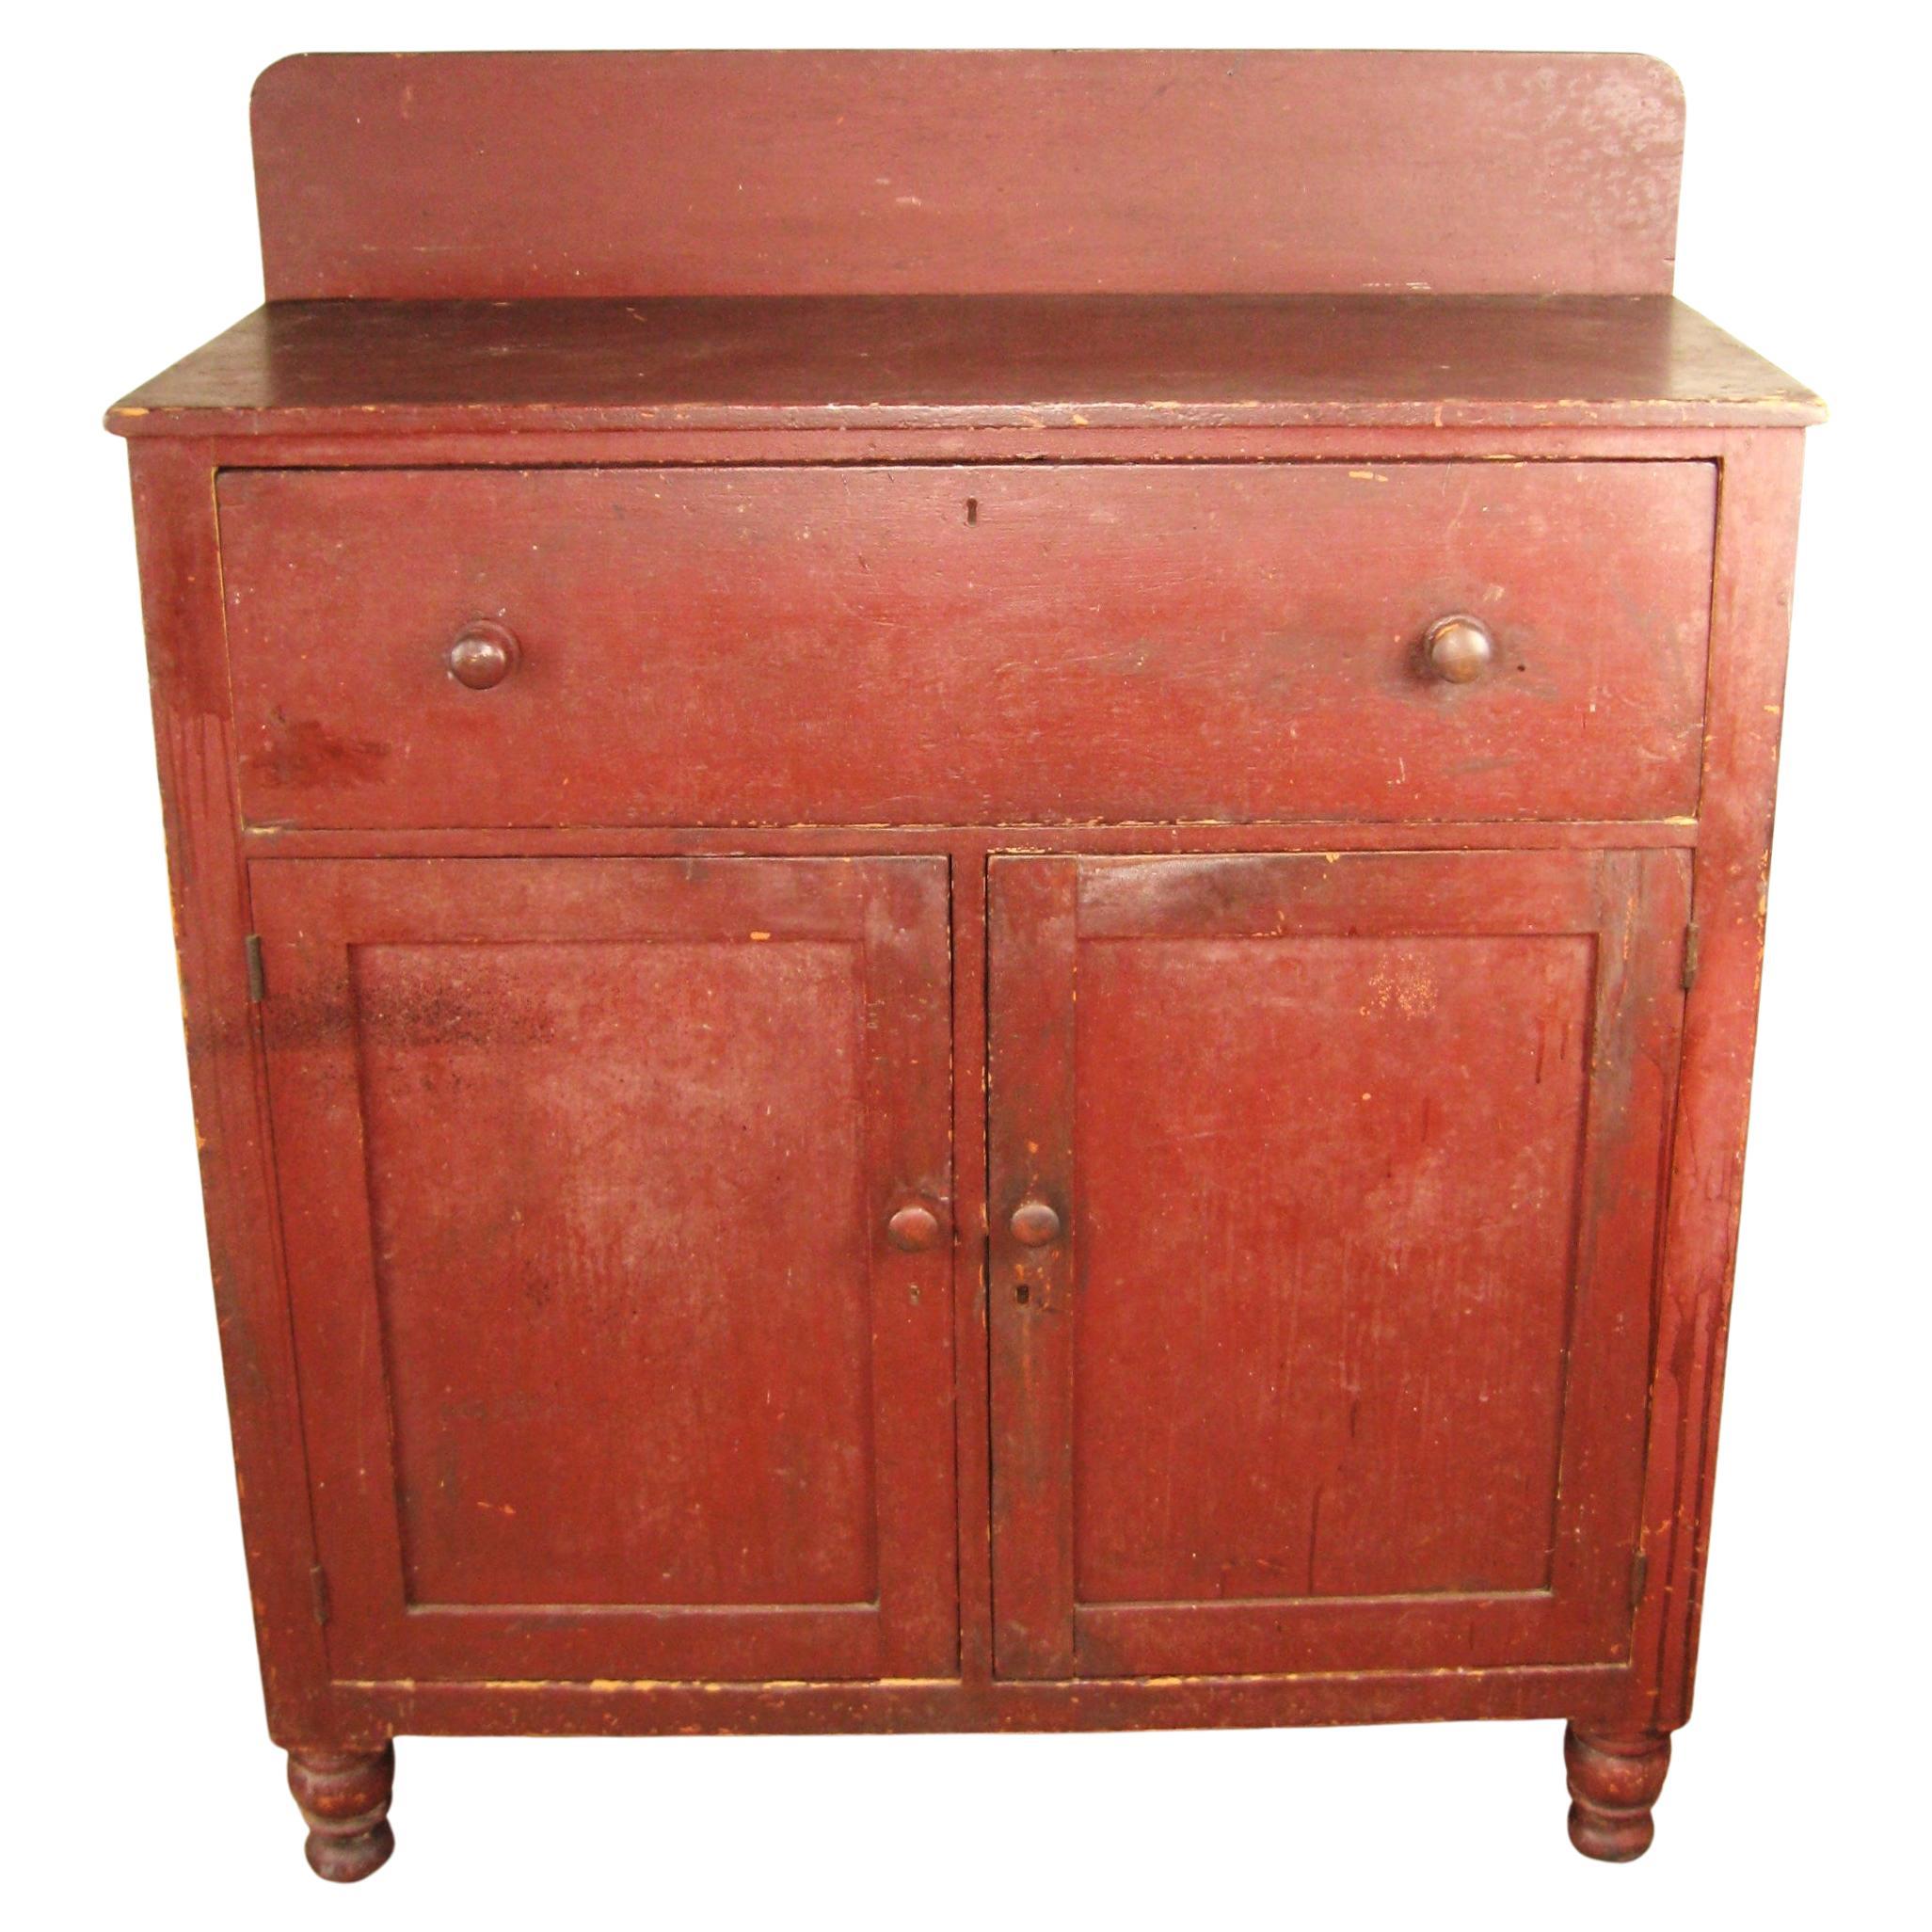 Mid 19th century Red wash/paint primitive Jelly Cupboard